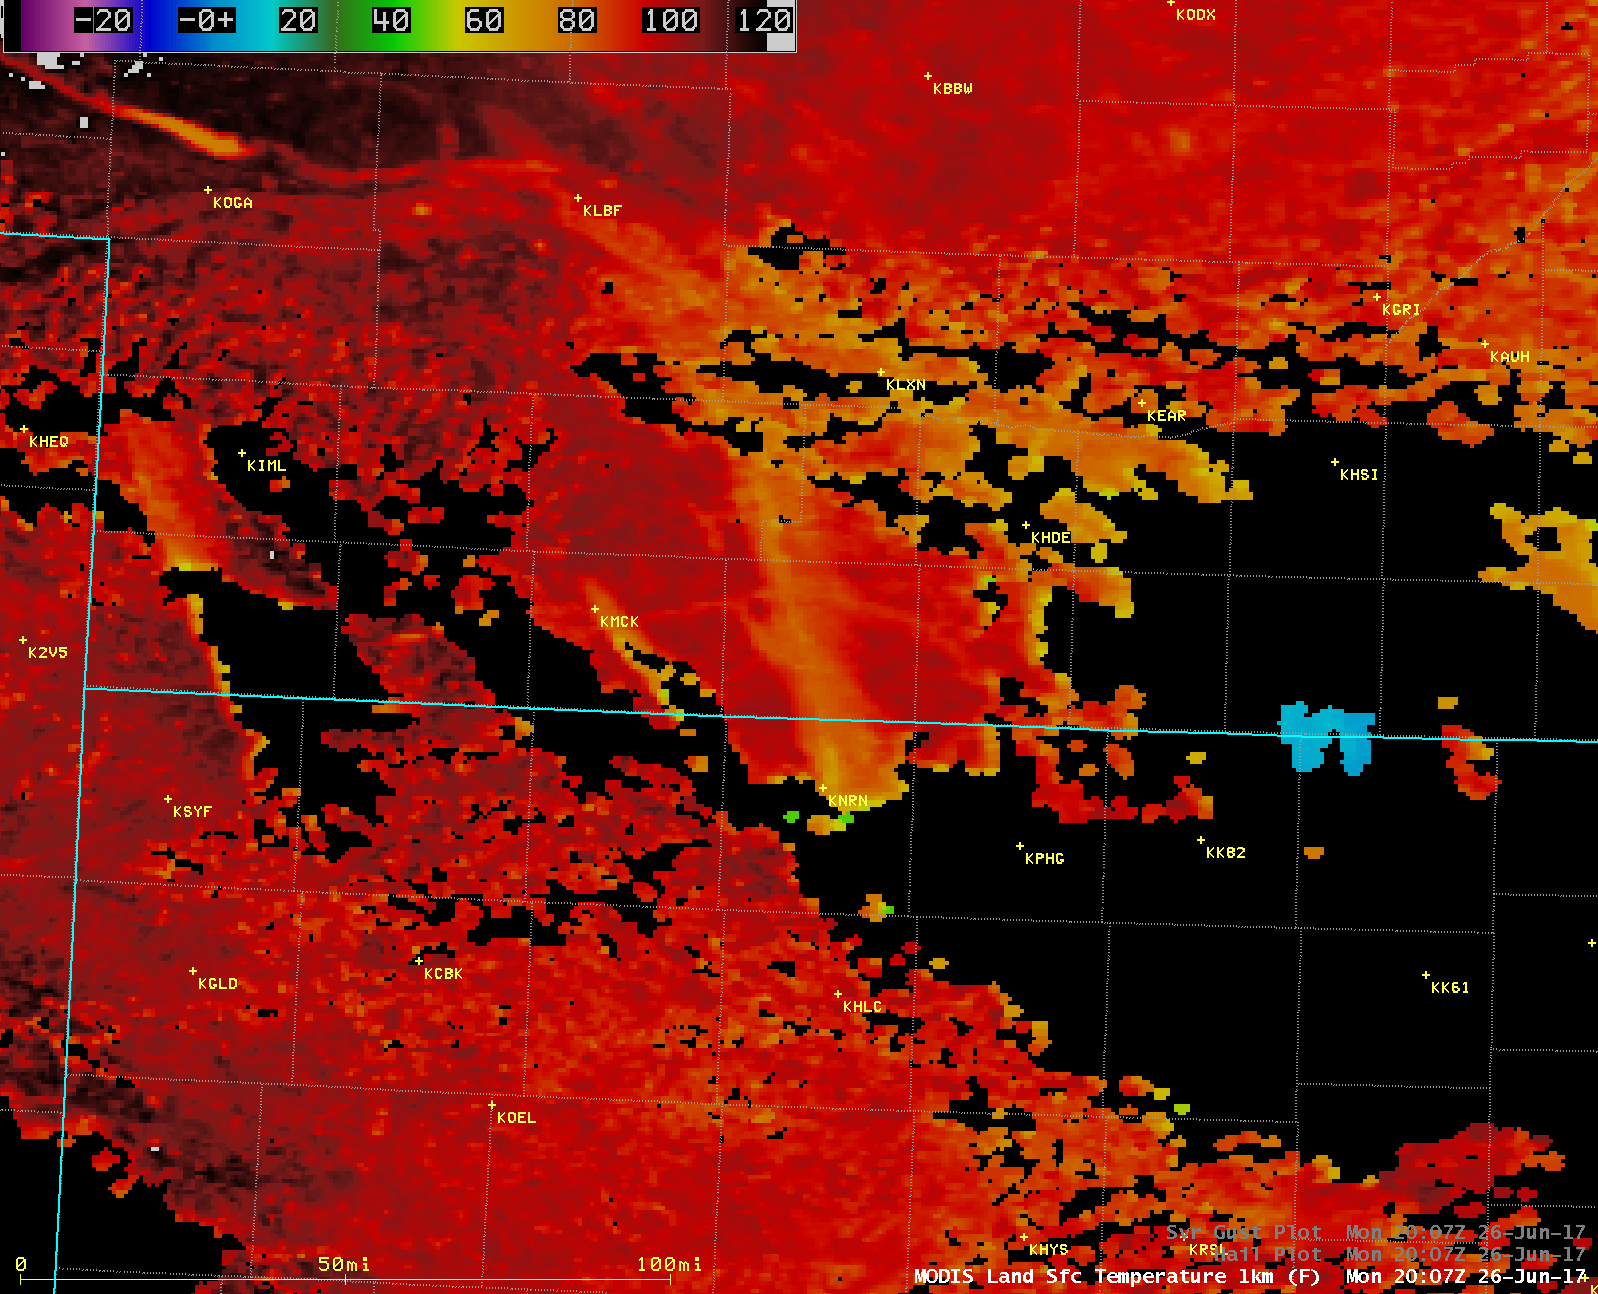 Aqua MODIS Land Surface Temperature product, Visible (0.65 µm), Infrared Window (11.0 µm) and Shortwave Infrared (3.7 µm) images [click to enlarge]